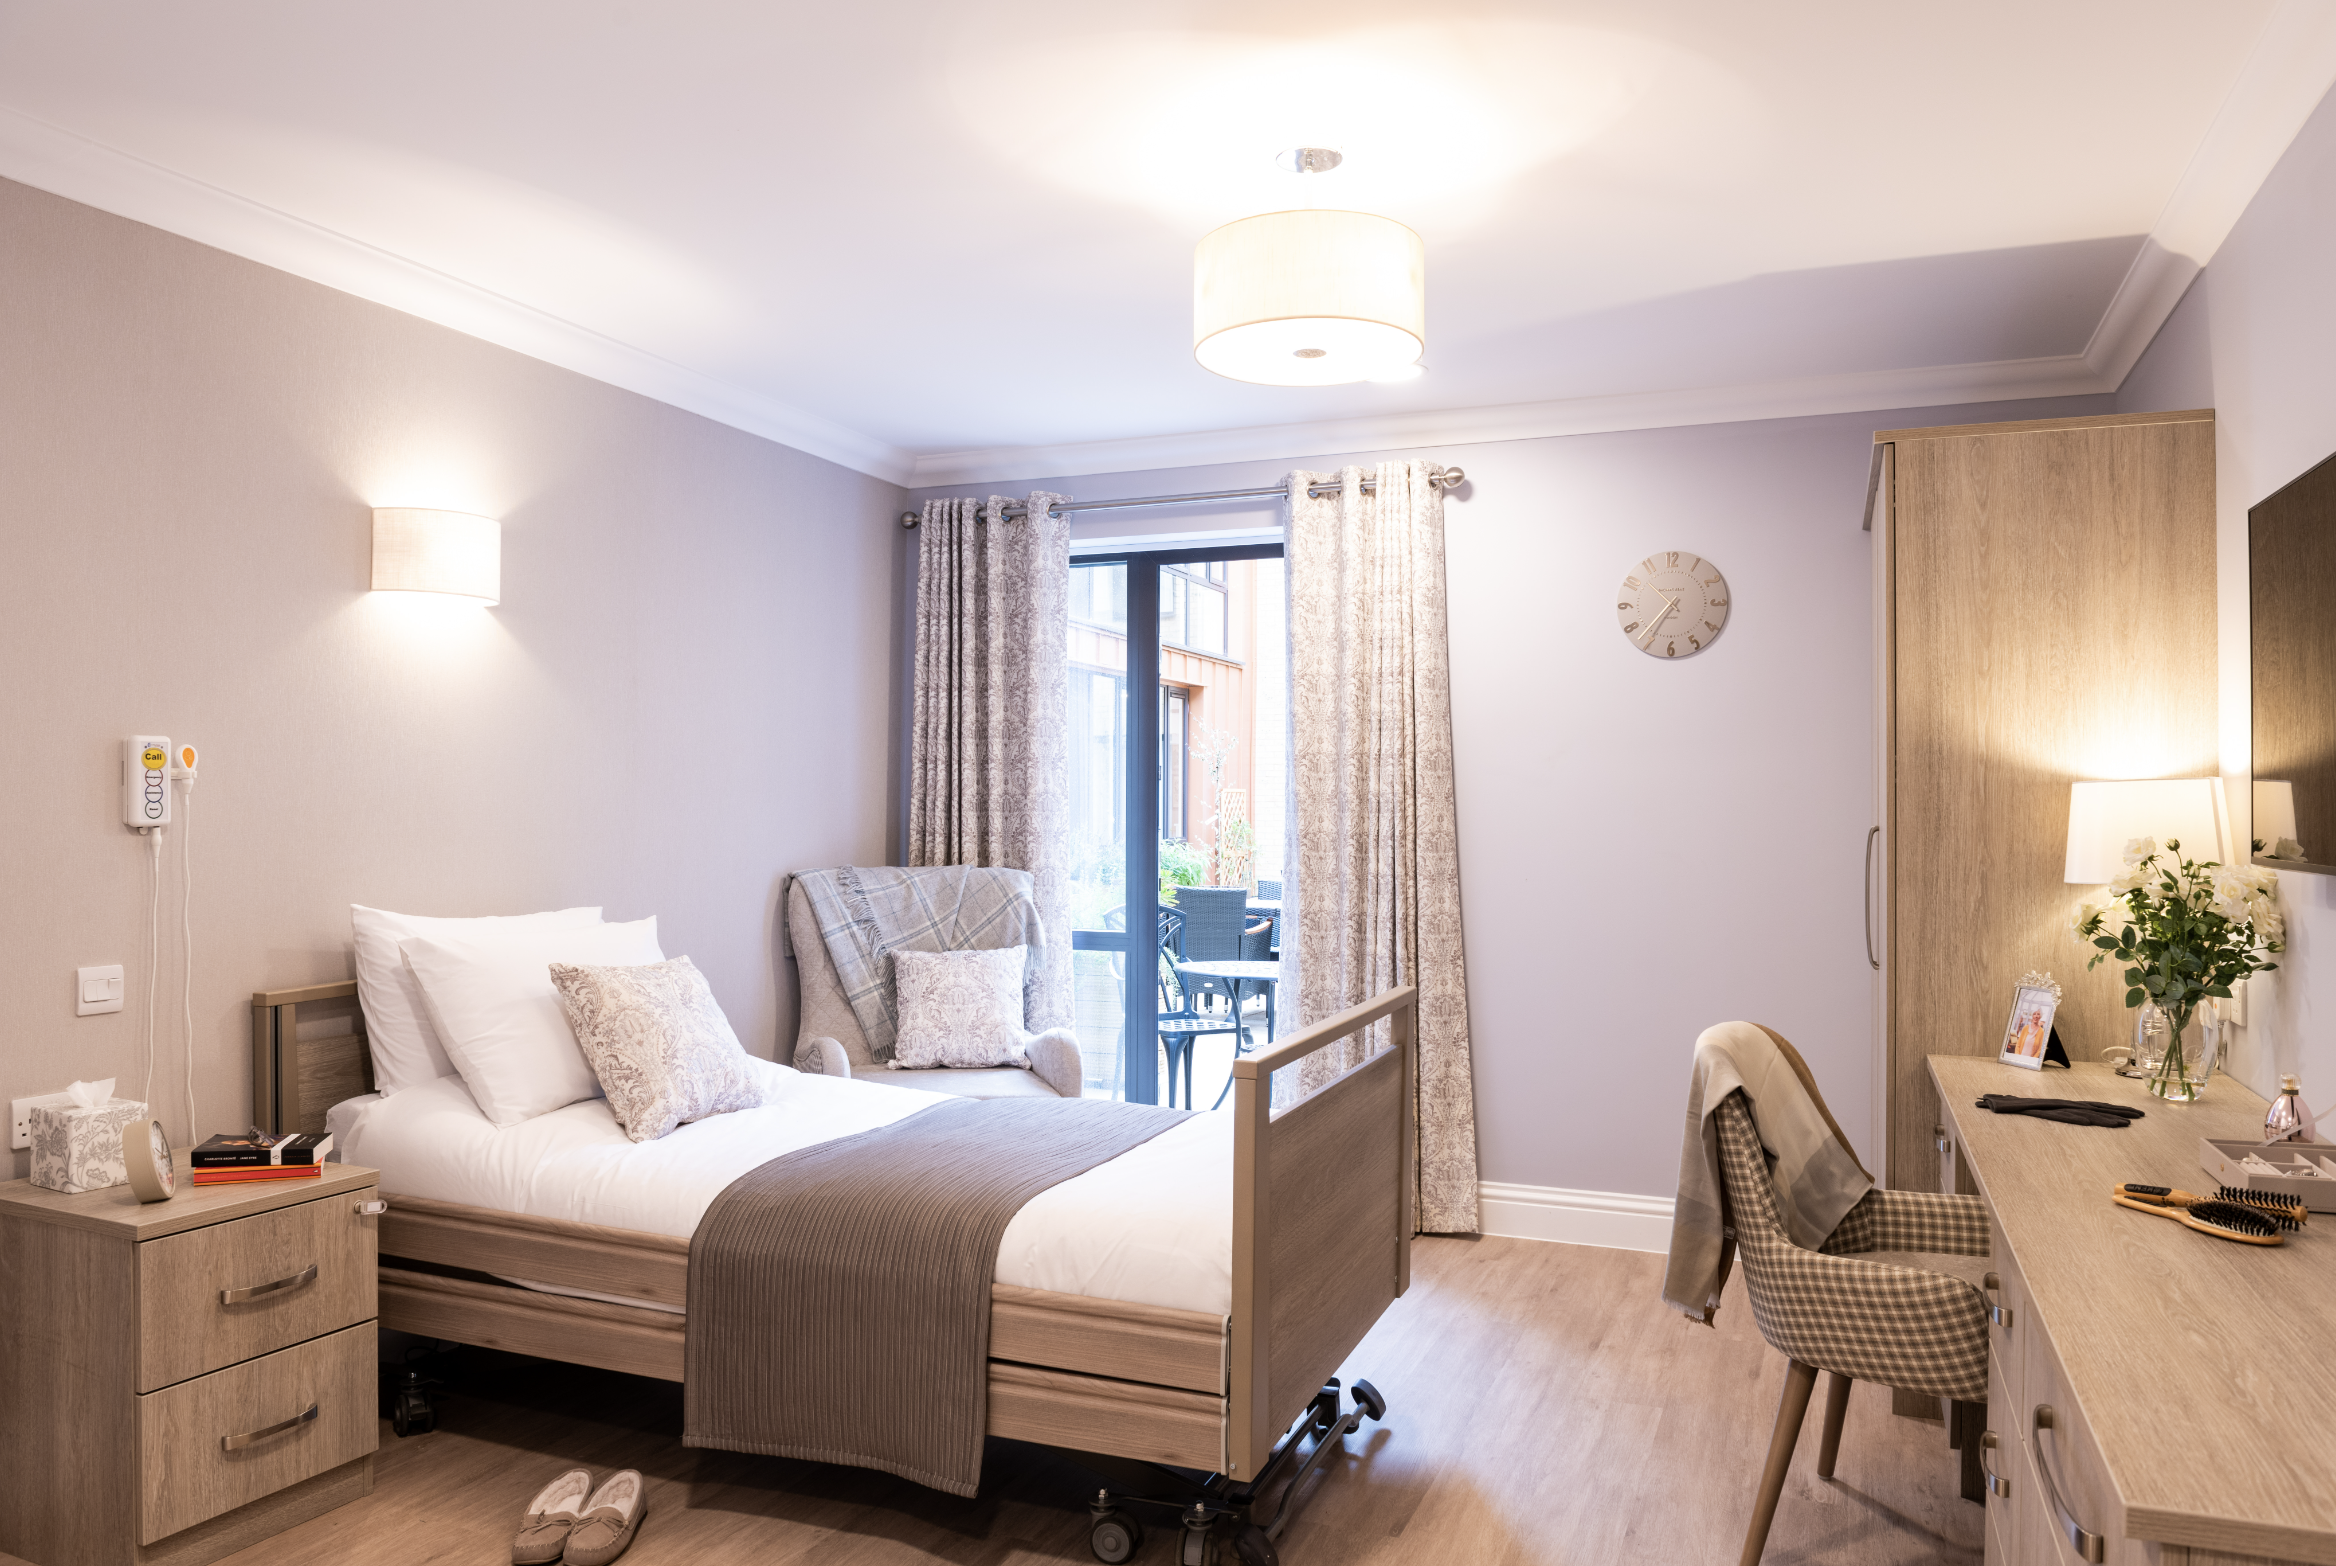 Bedroom of Chestnut Manor care home in Wanstead, London